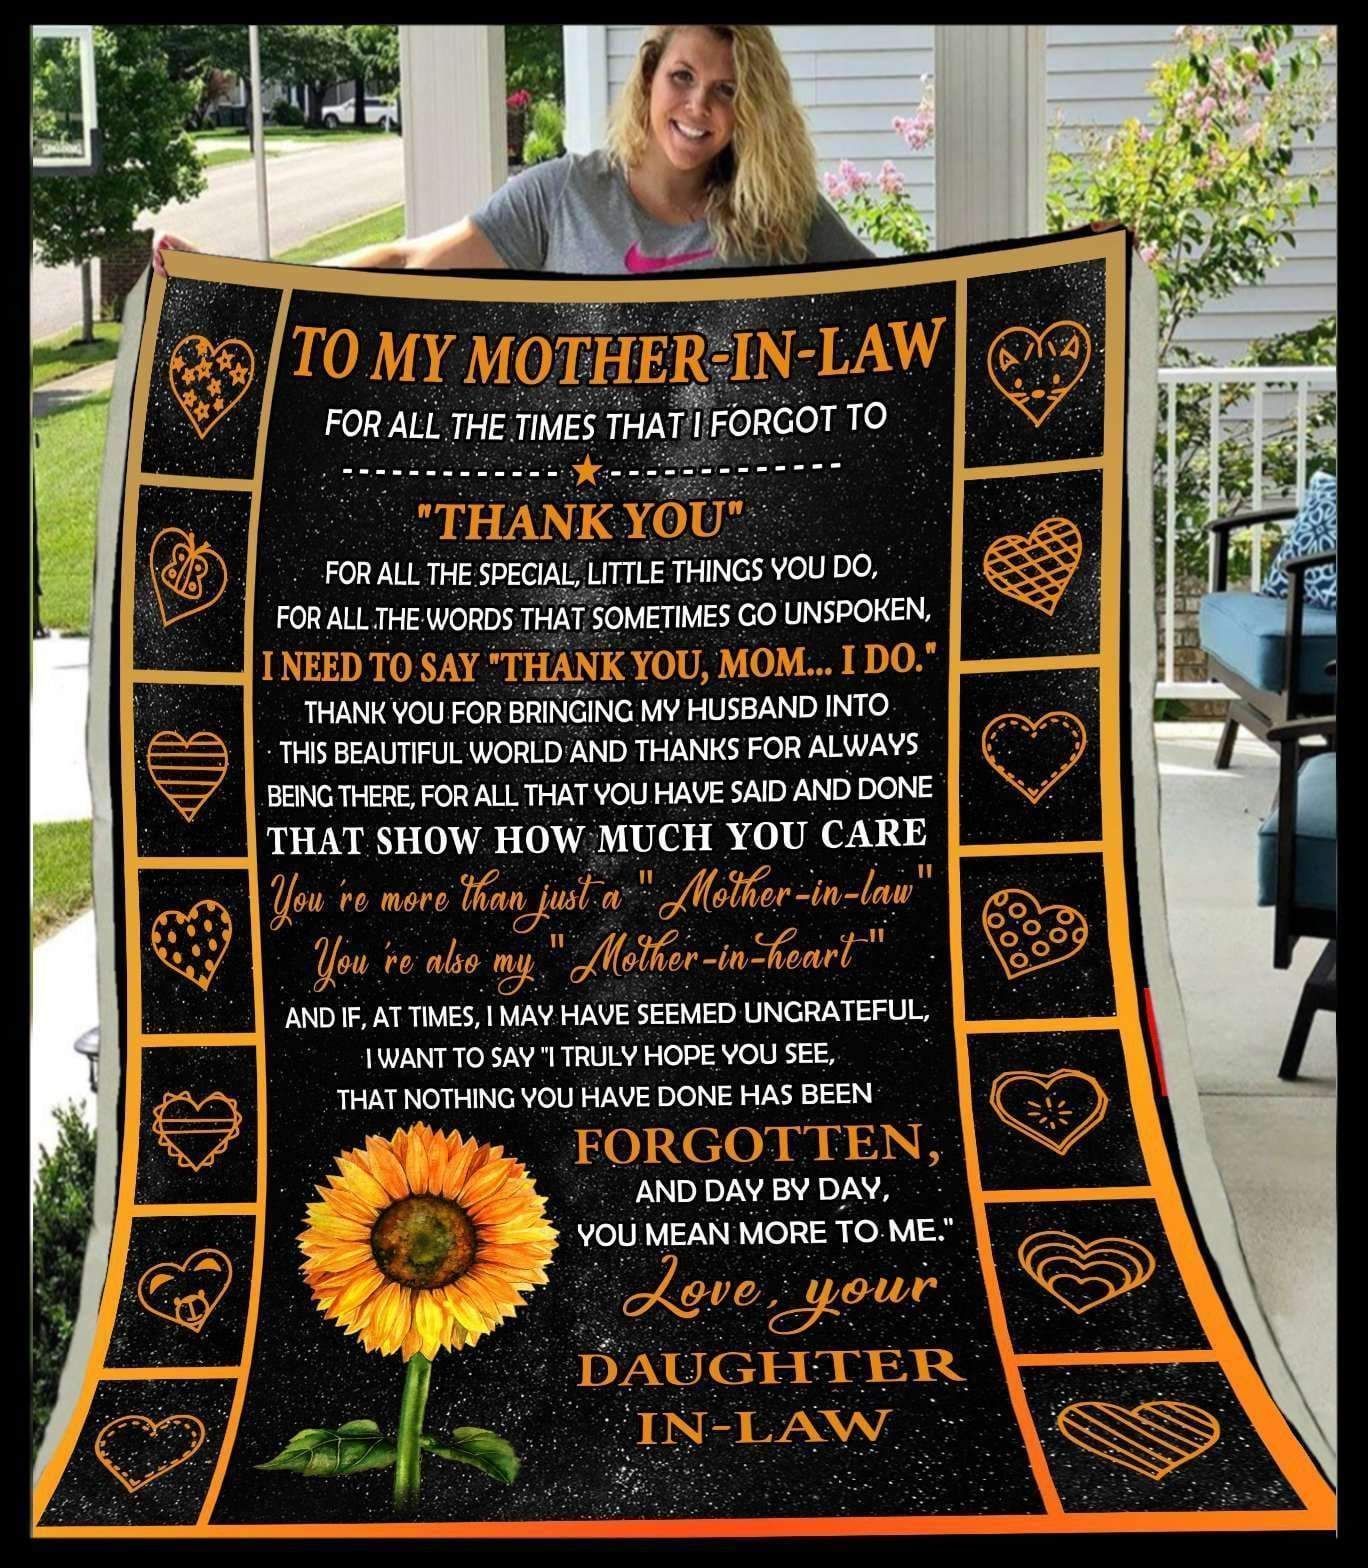 Blanket Giving Mother-in-law Thanks For All The Special You Do